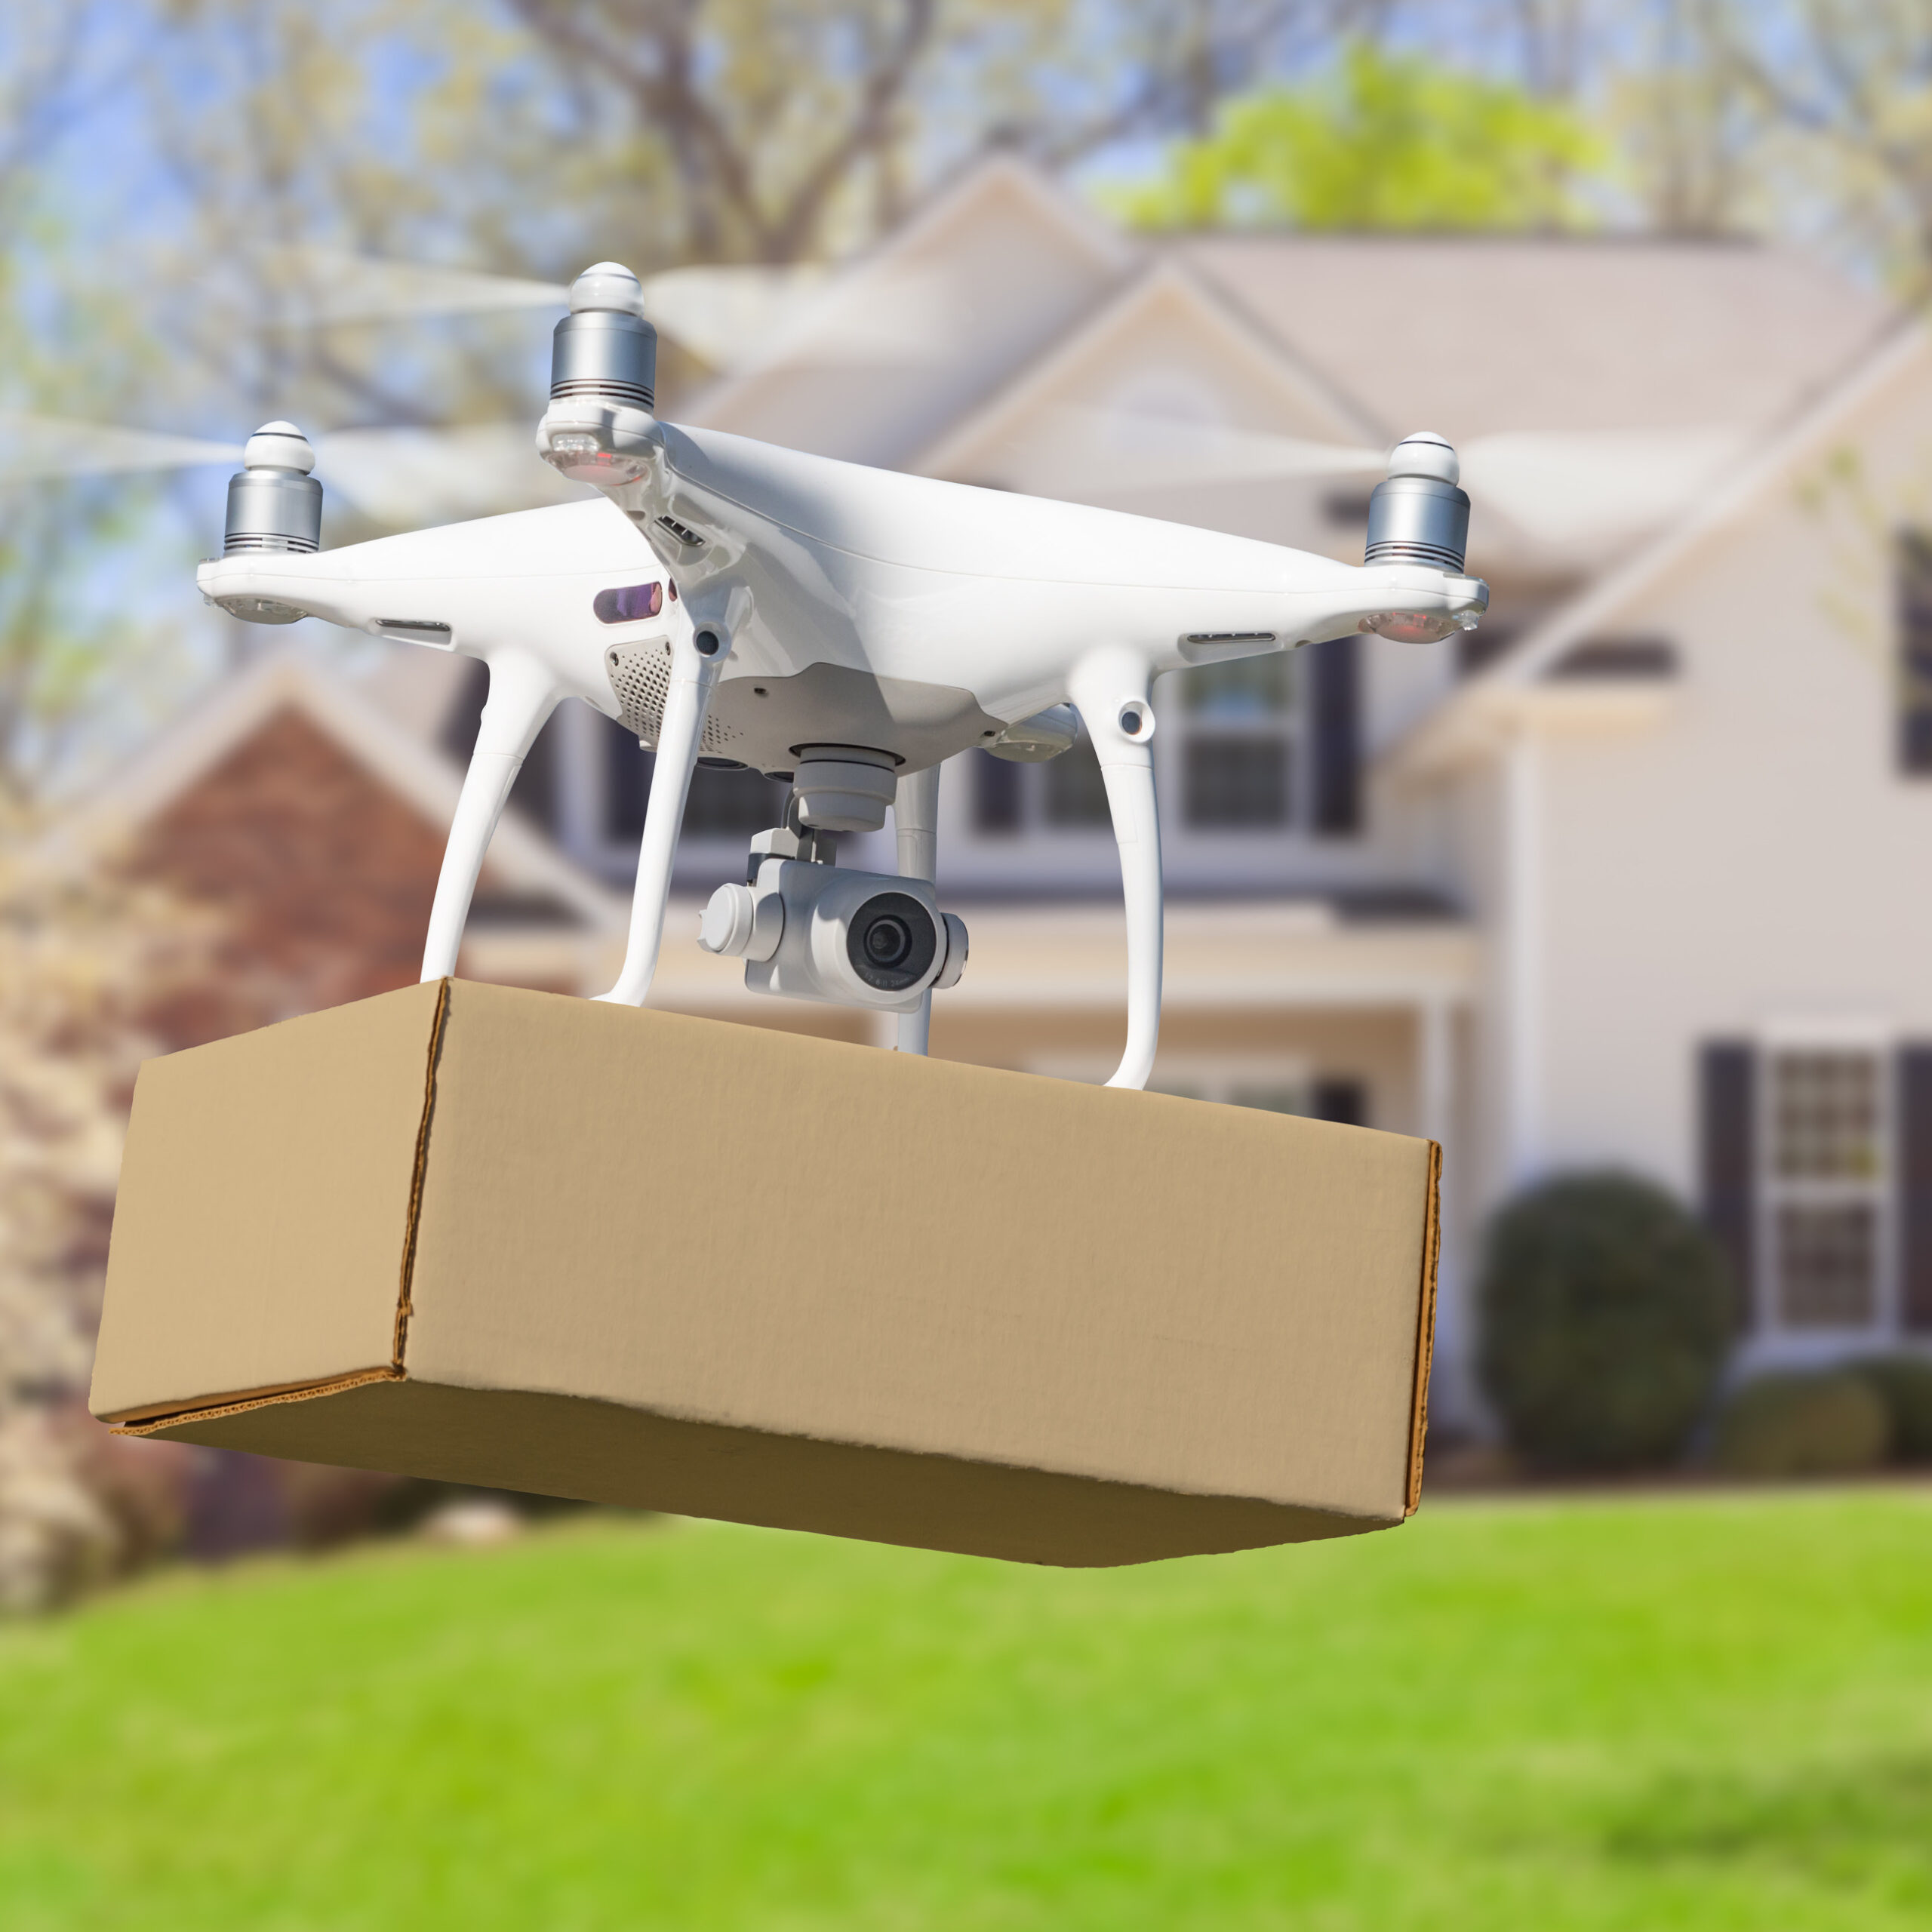 Drone delivering box to home